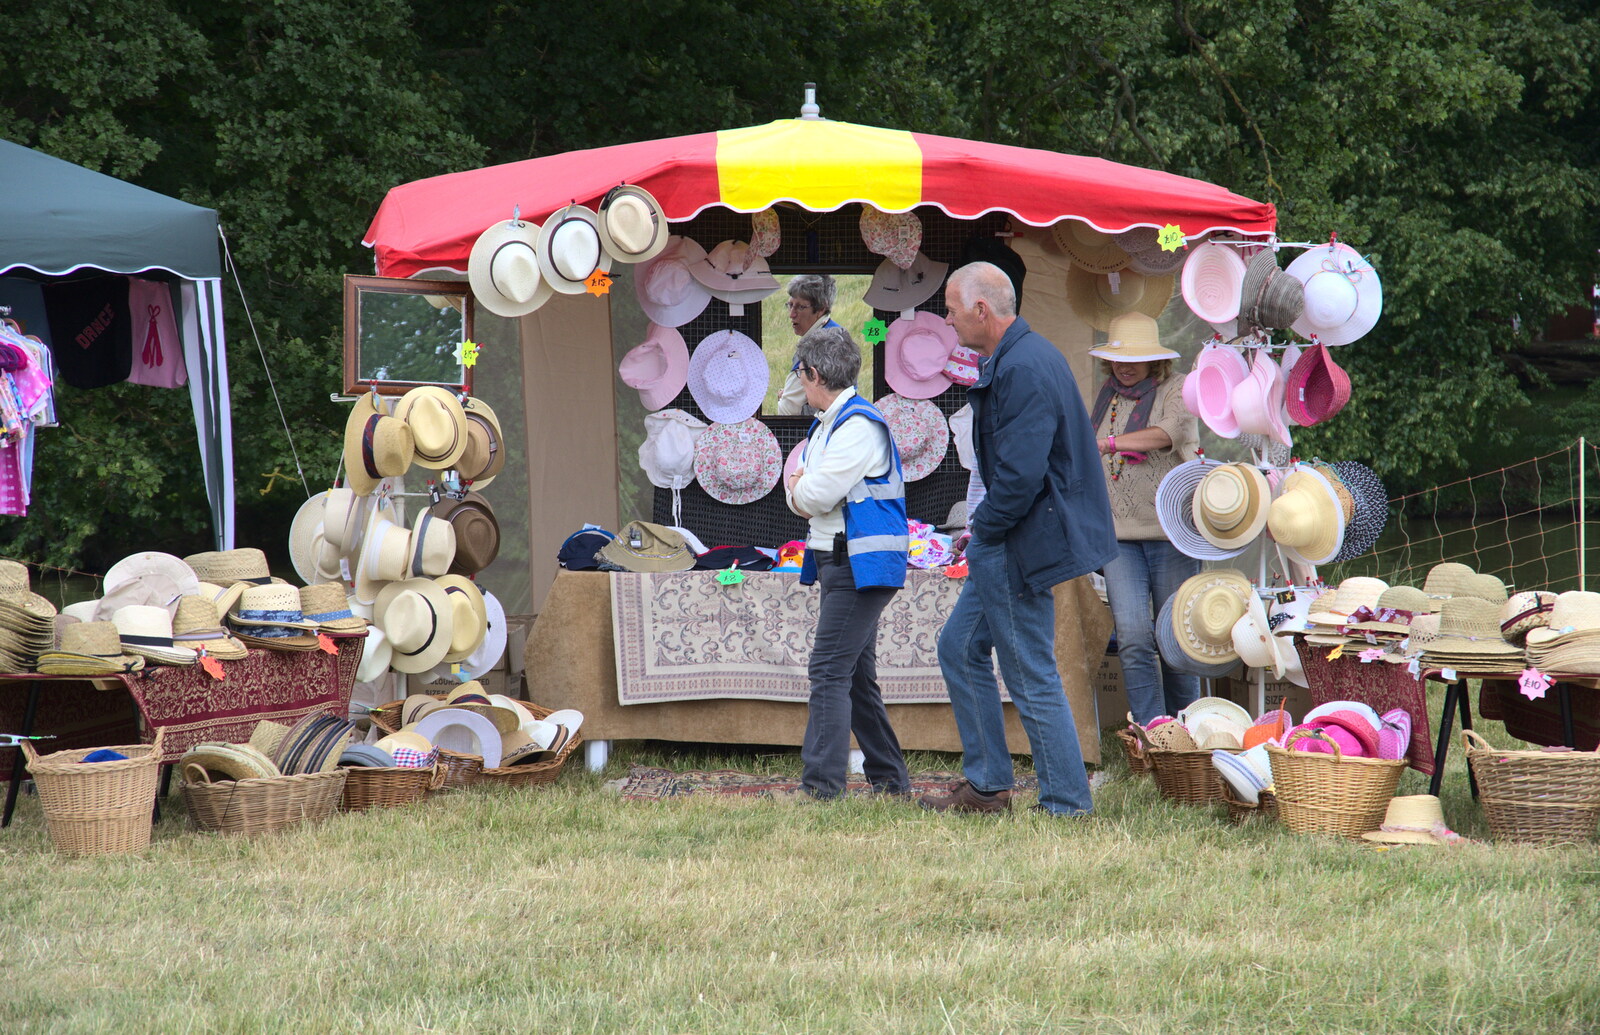 It's all completely hat stand from The Formerly-Known-As-The-Eye-Show, Palgrave, Suffolk - 17th June 2018